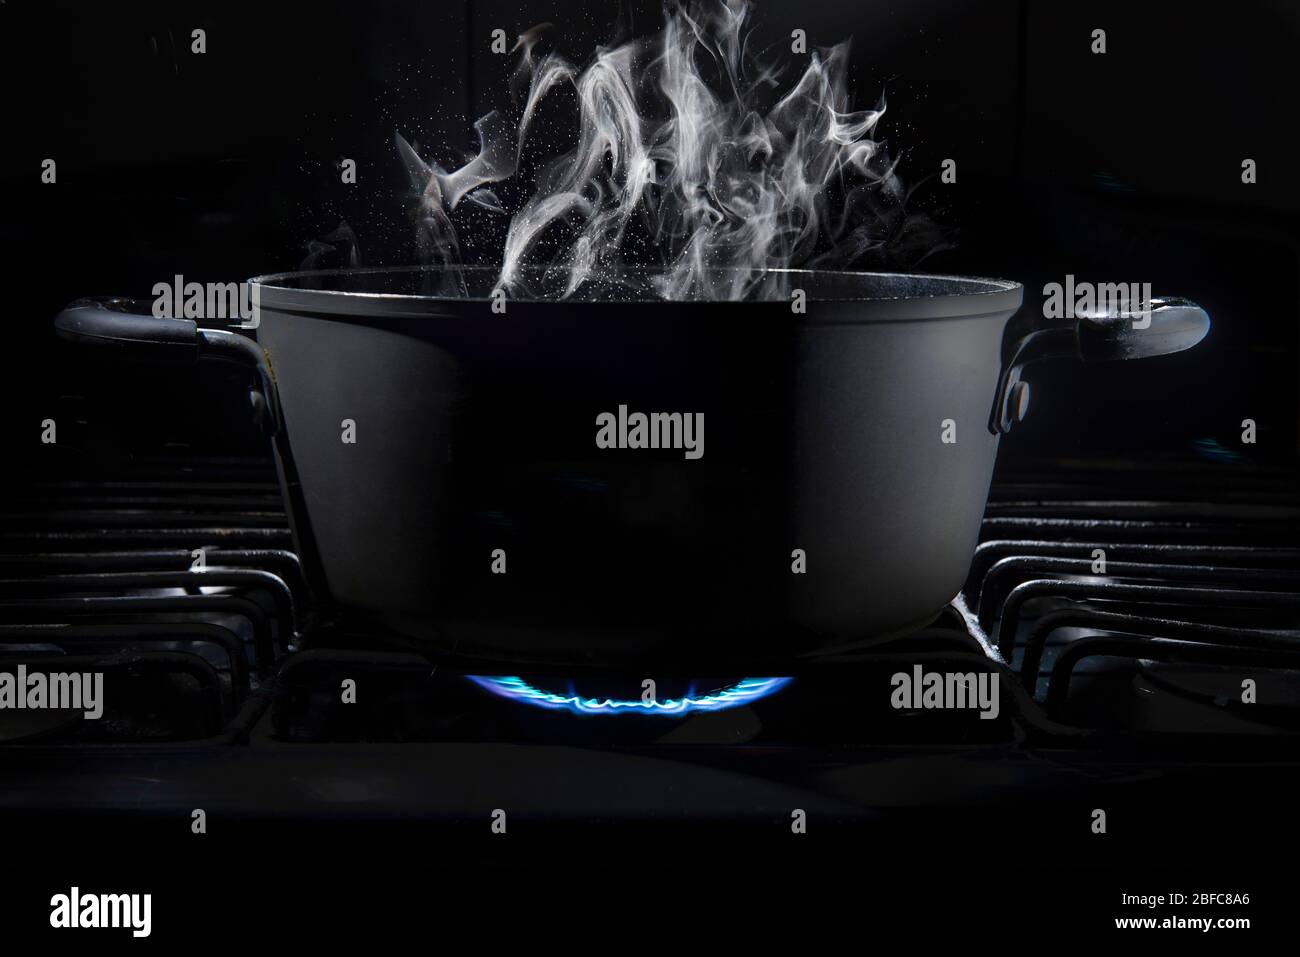 Cooking pot on stove fire with food inside in a dark kitchen and a black background with steam coming out of the cooking pot, low key light. Stock Photo